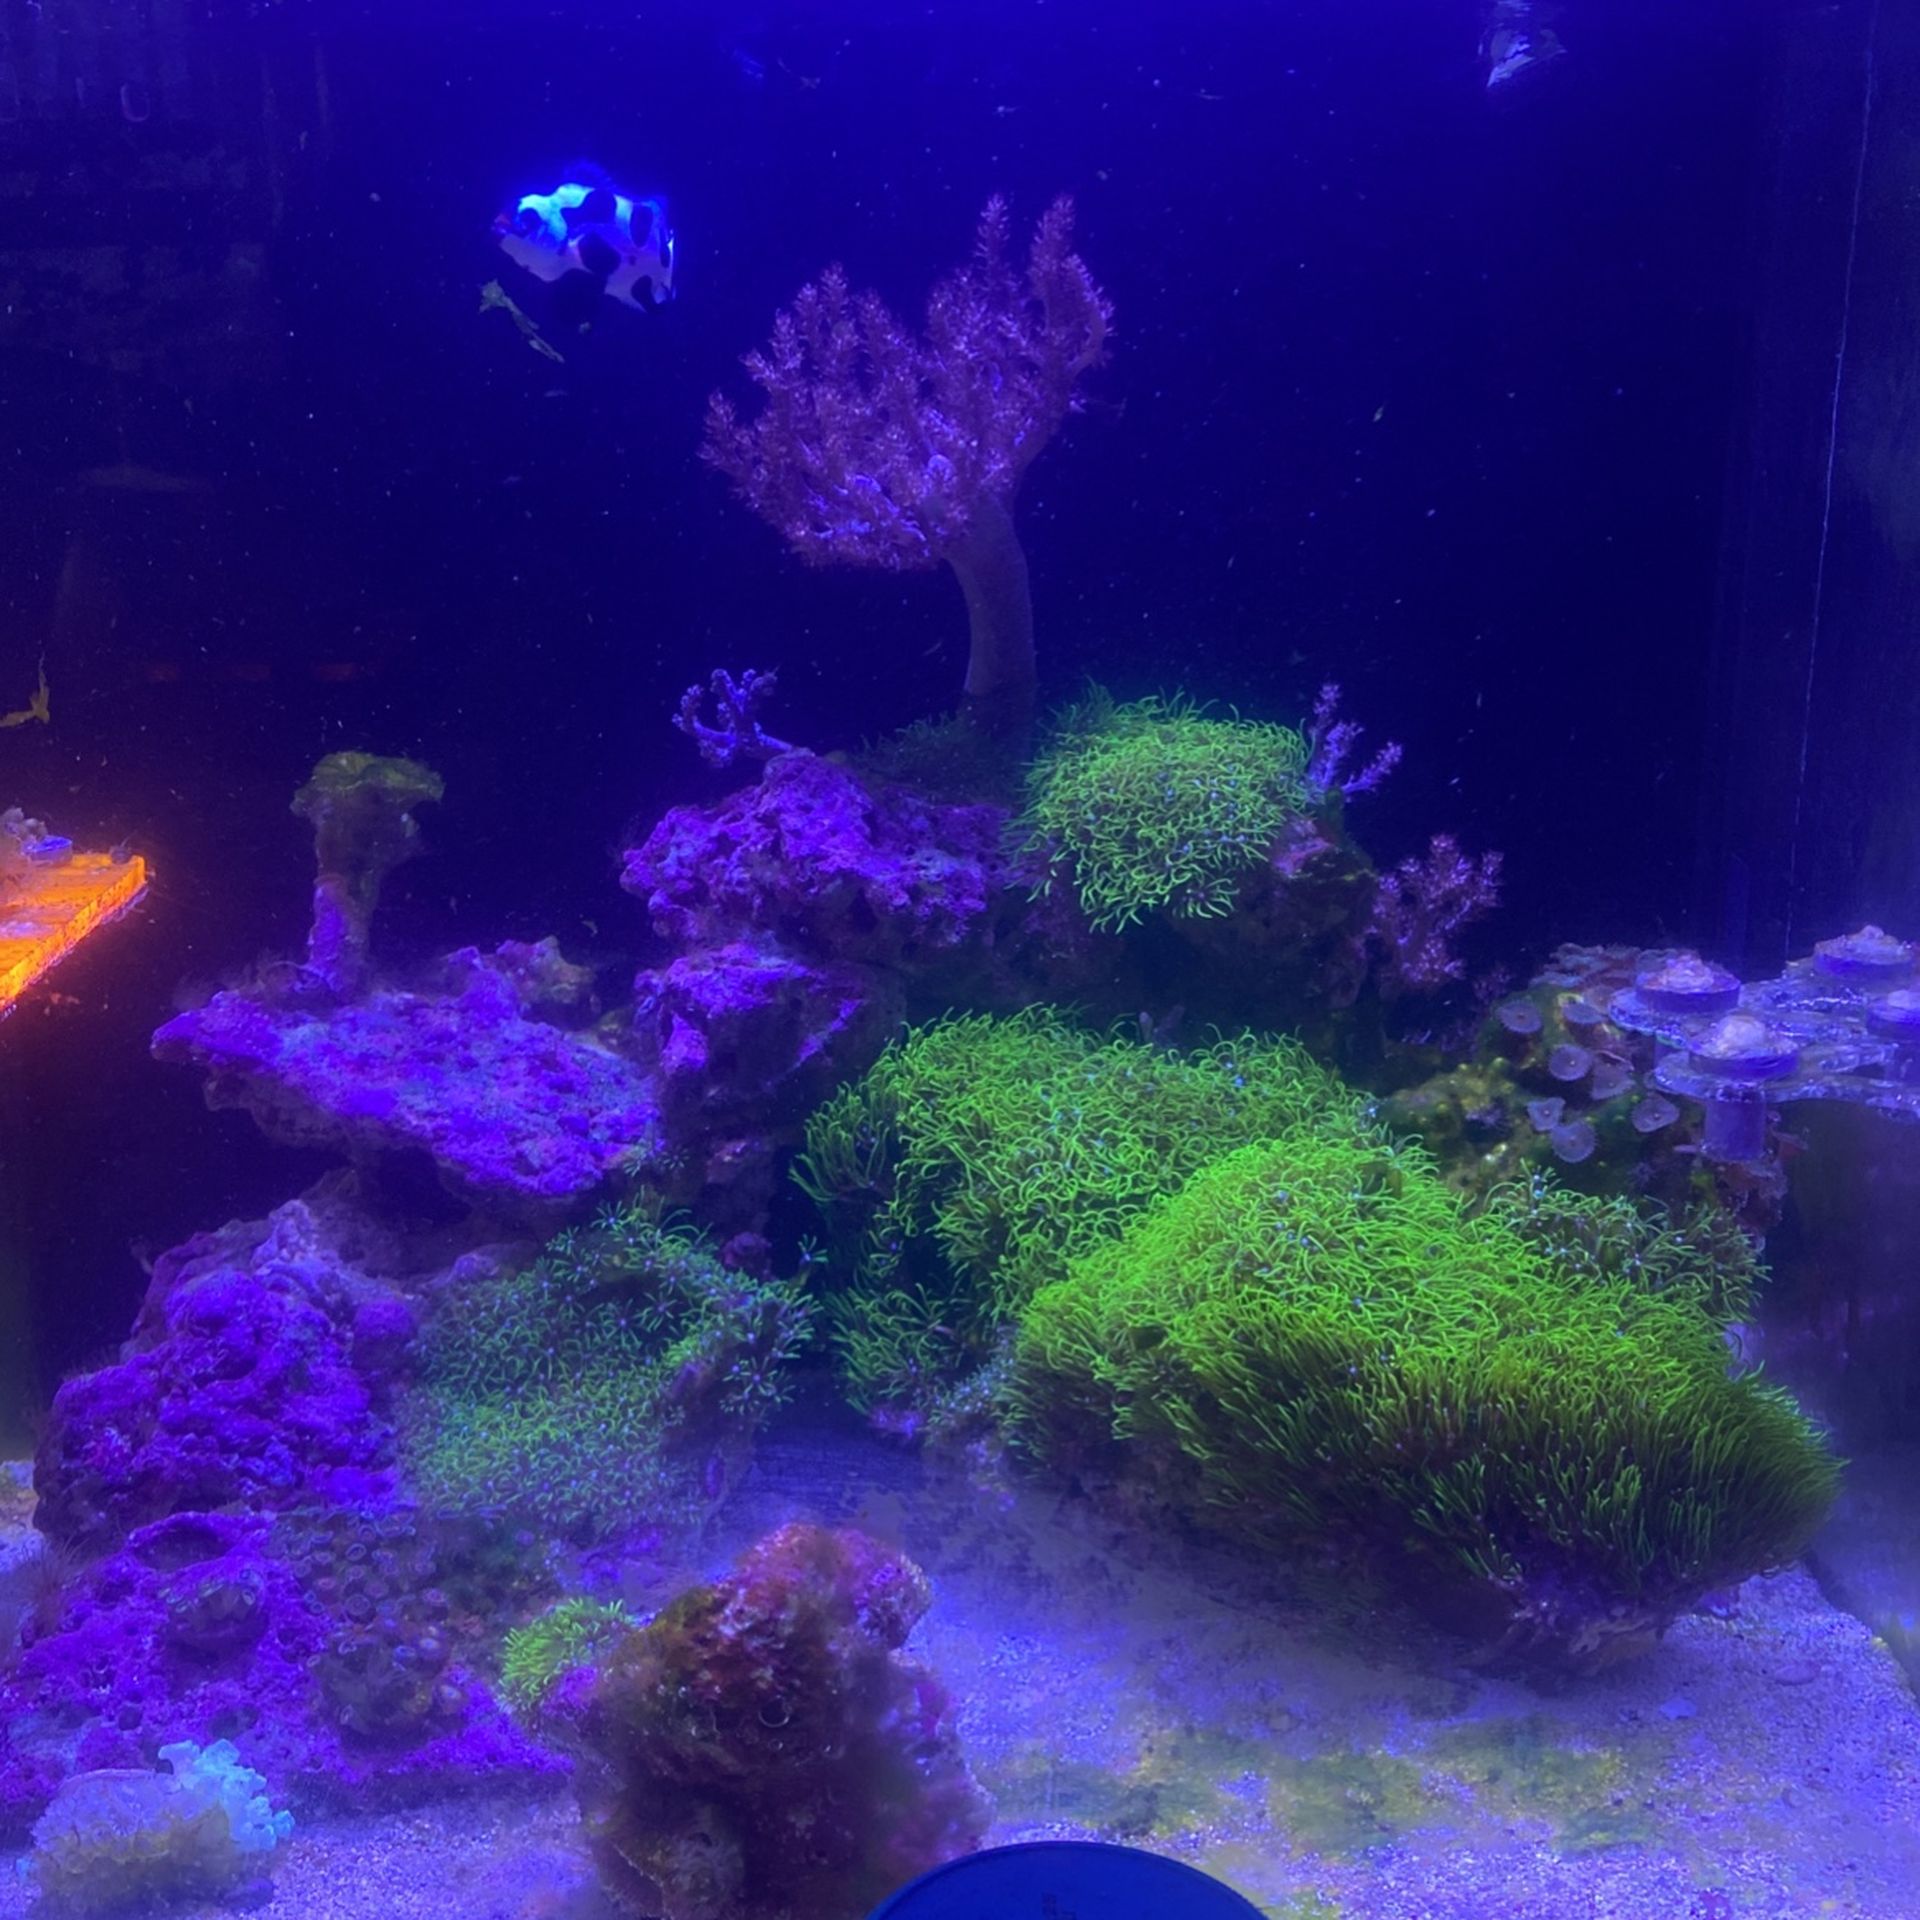 Live Rock For Sale Some With Coral On It for Sale in Ontario, CA - OfferUp